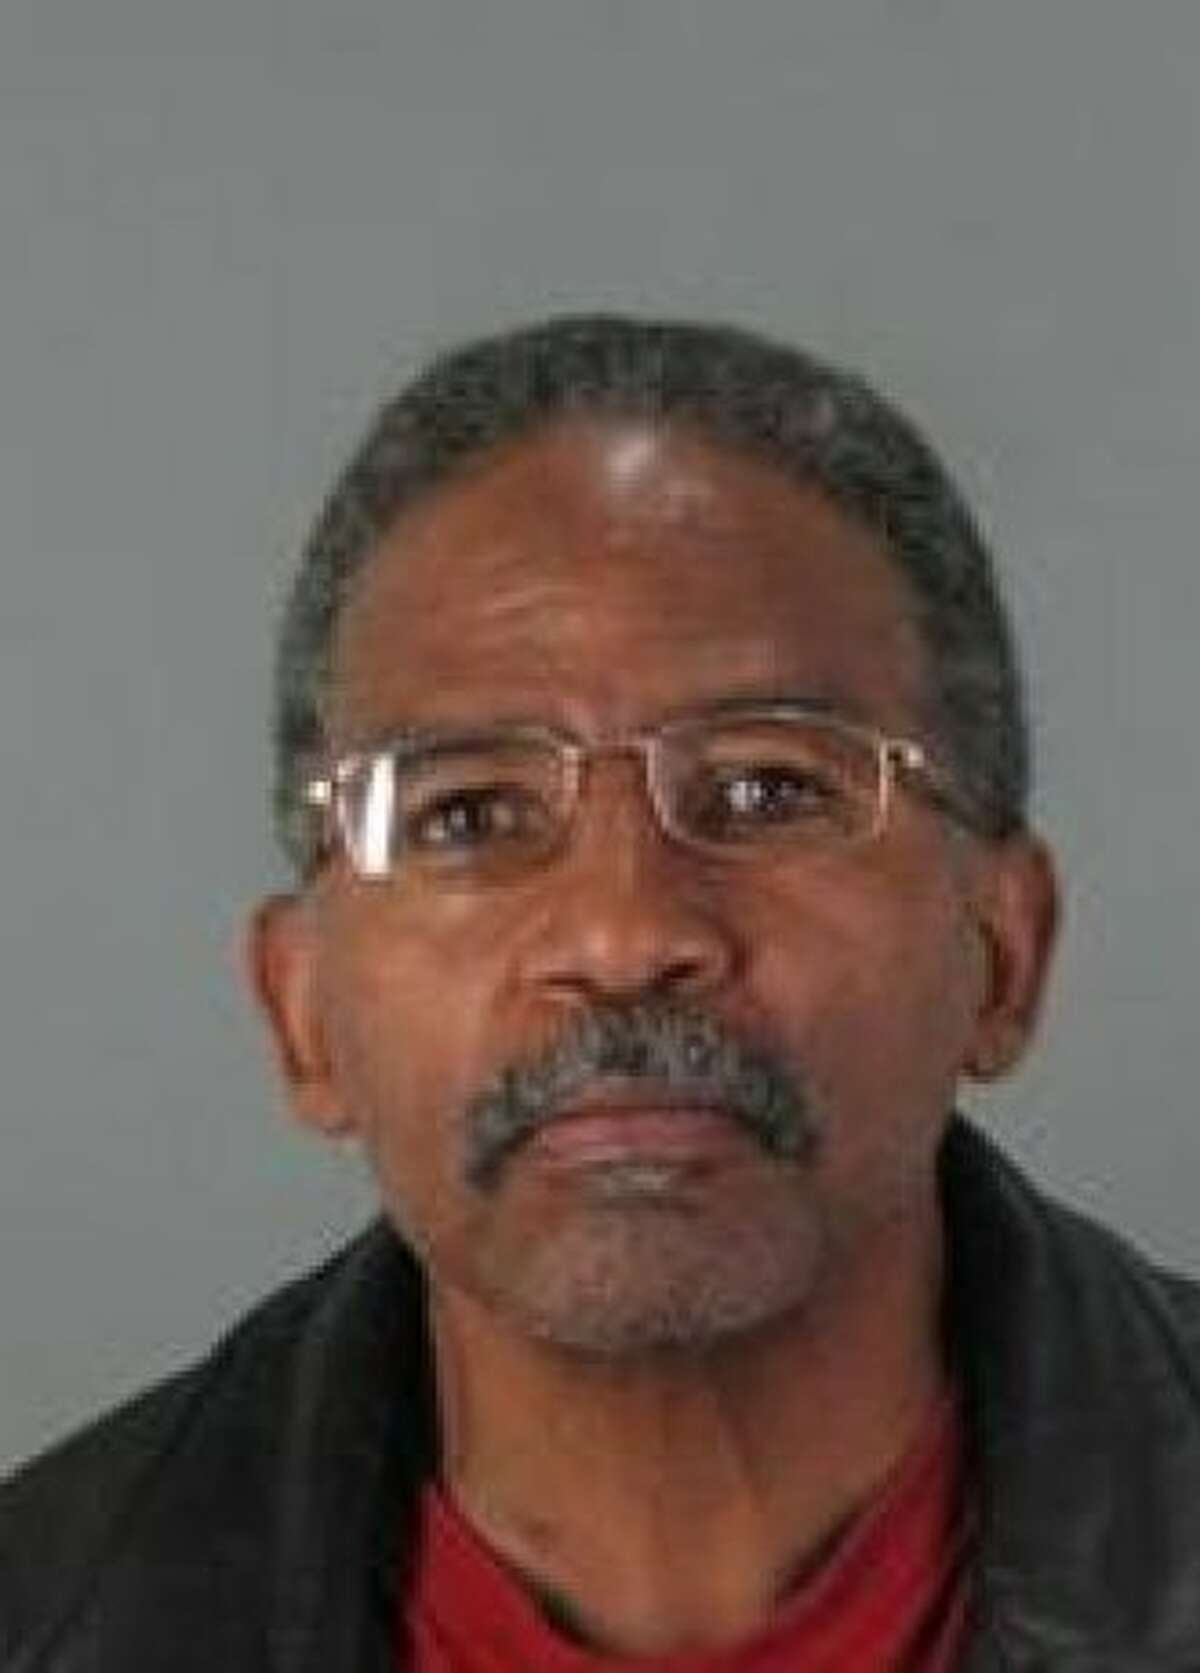 Gregory Leon Elarms, 58, of Pittsburg, is suspected in the killing of David Lewis.